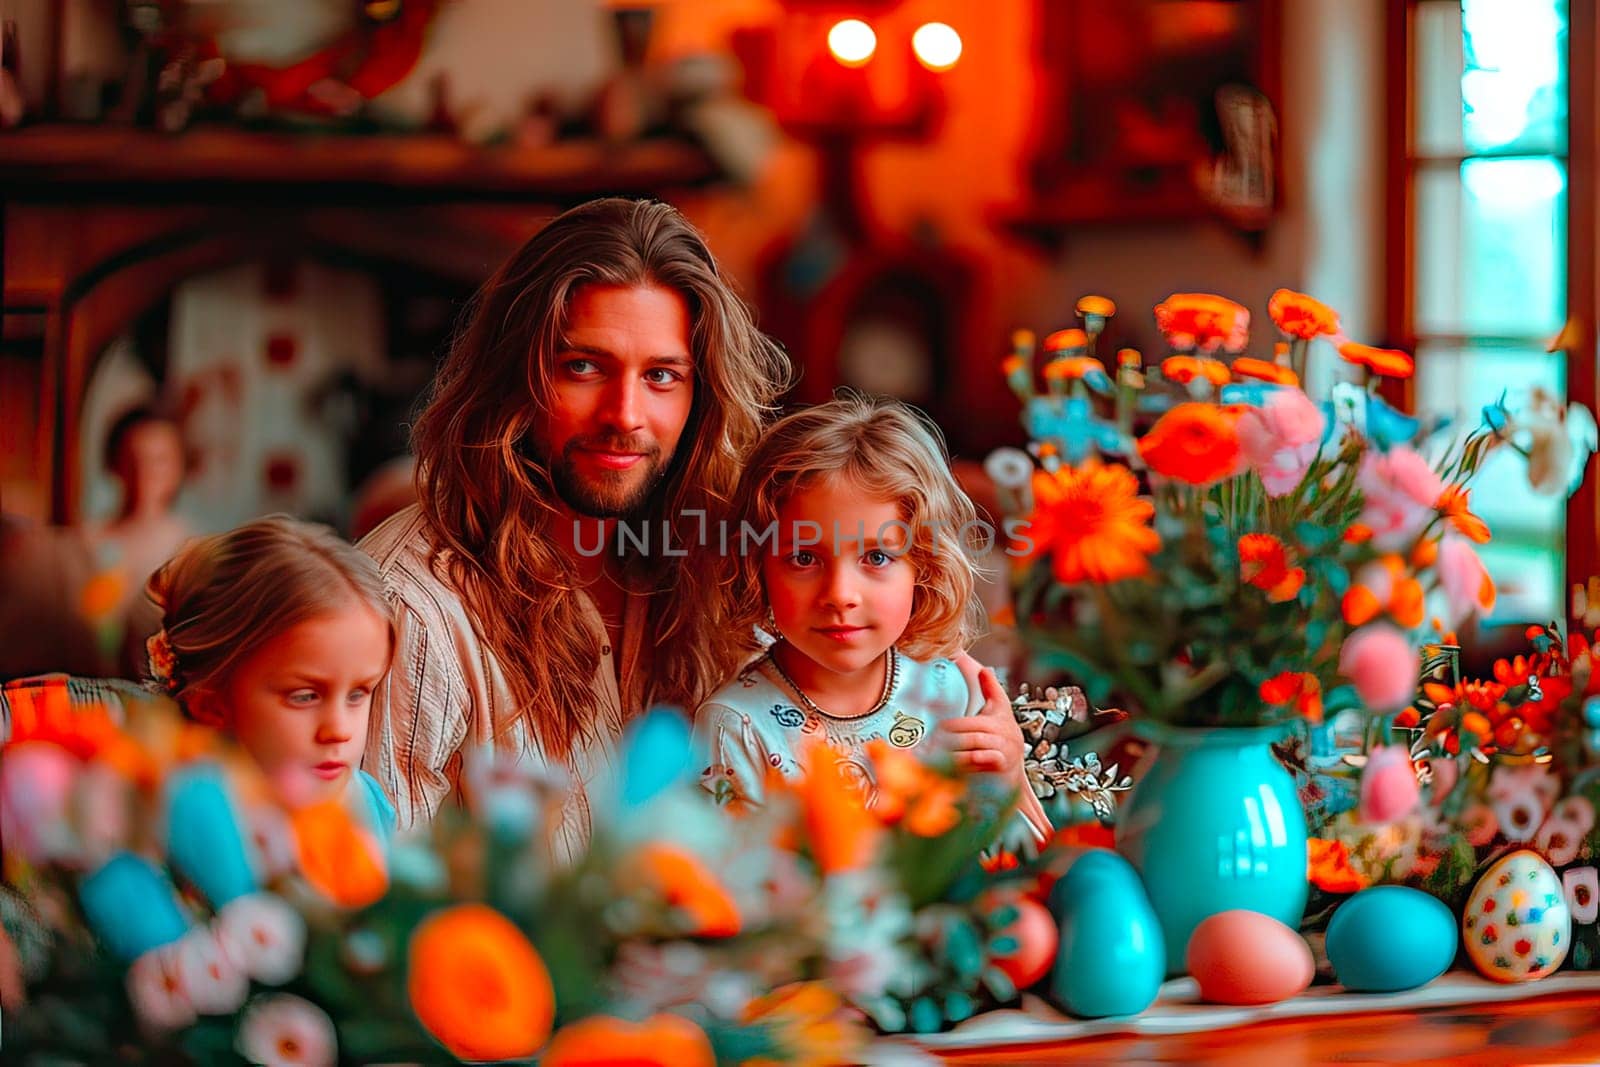 A long-haired man poses for a photo with his daughters. by fotodrobik